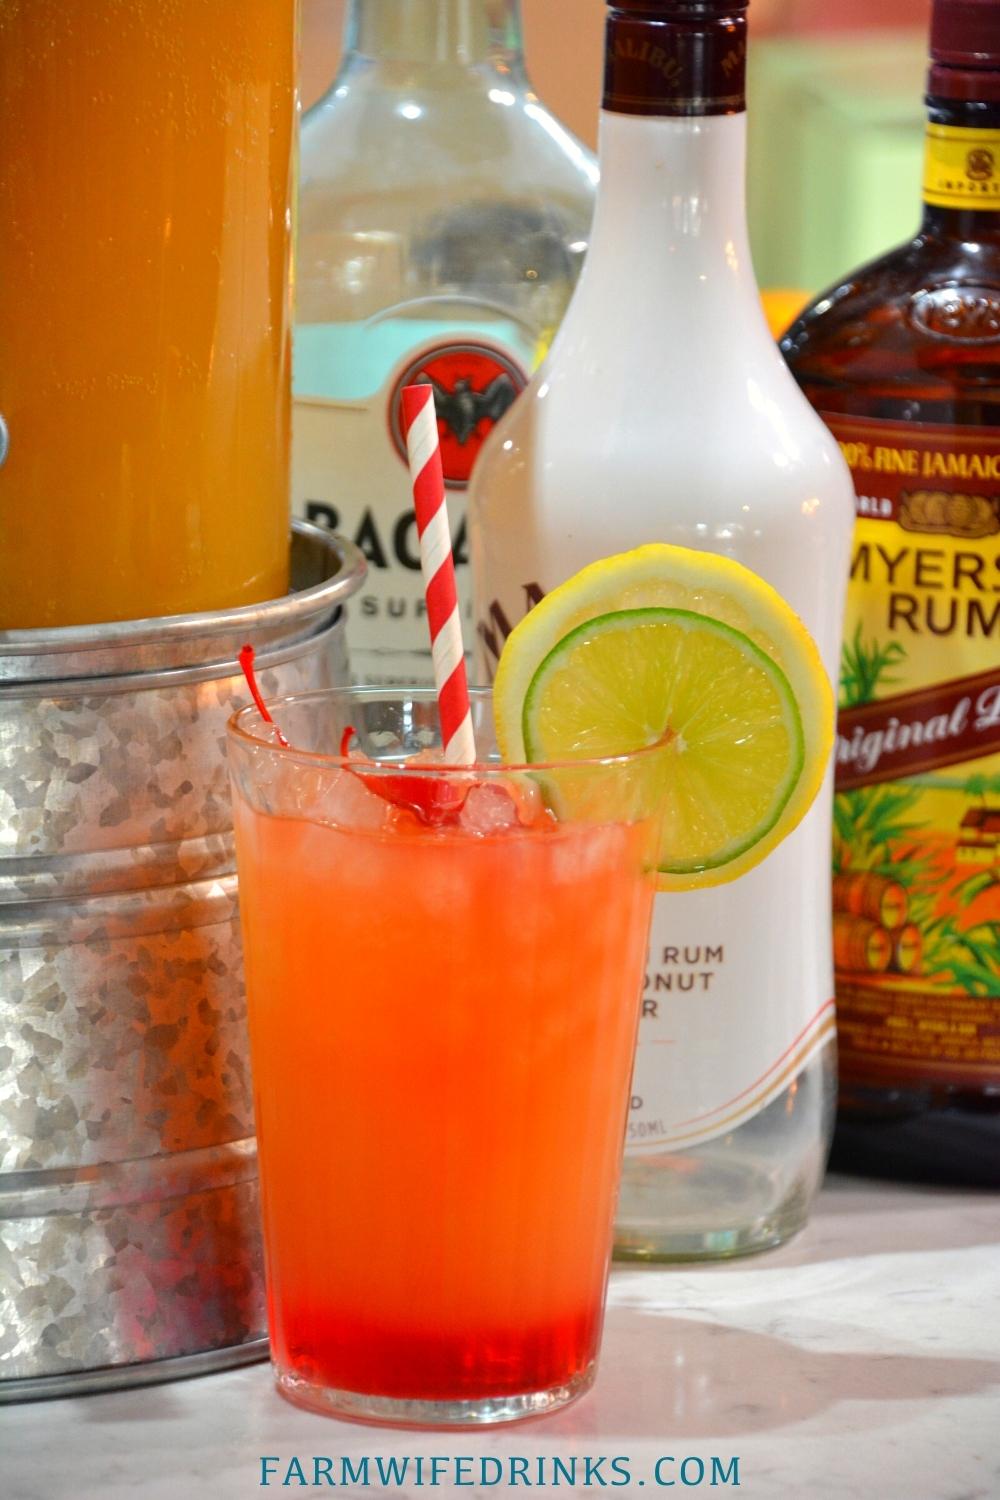 3 Rum Punch - The Farmwife Drinks